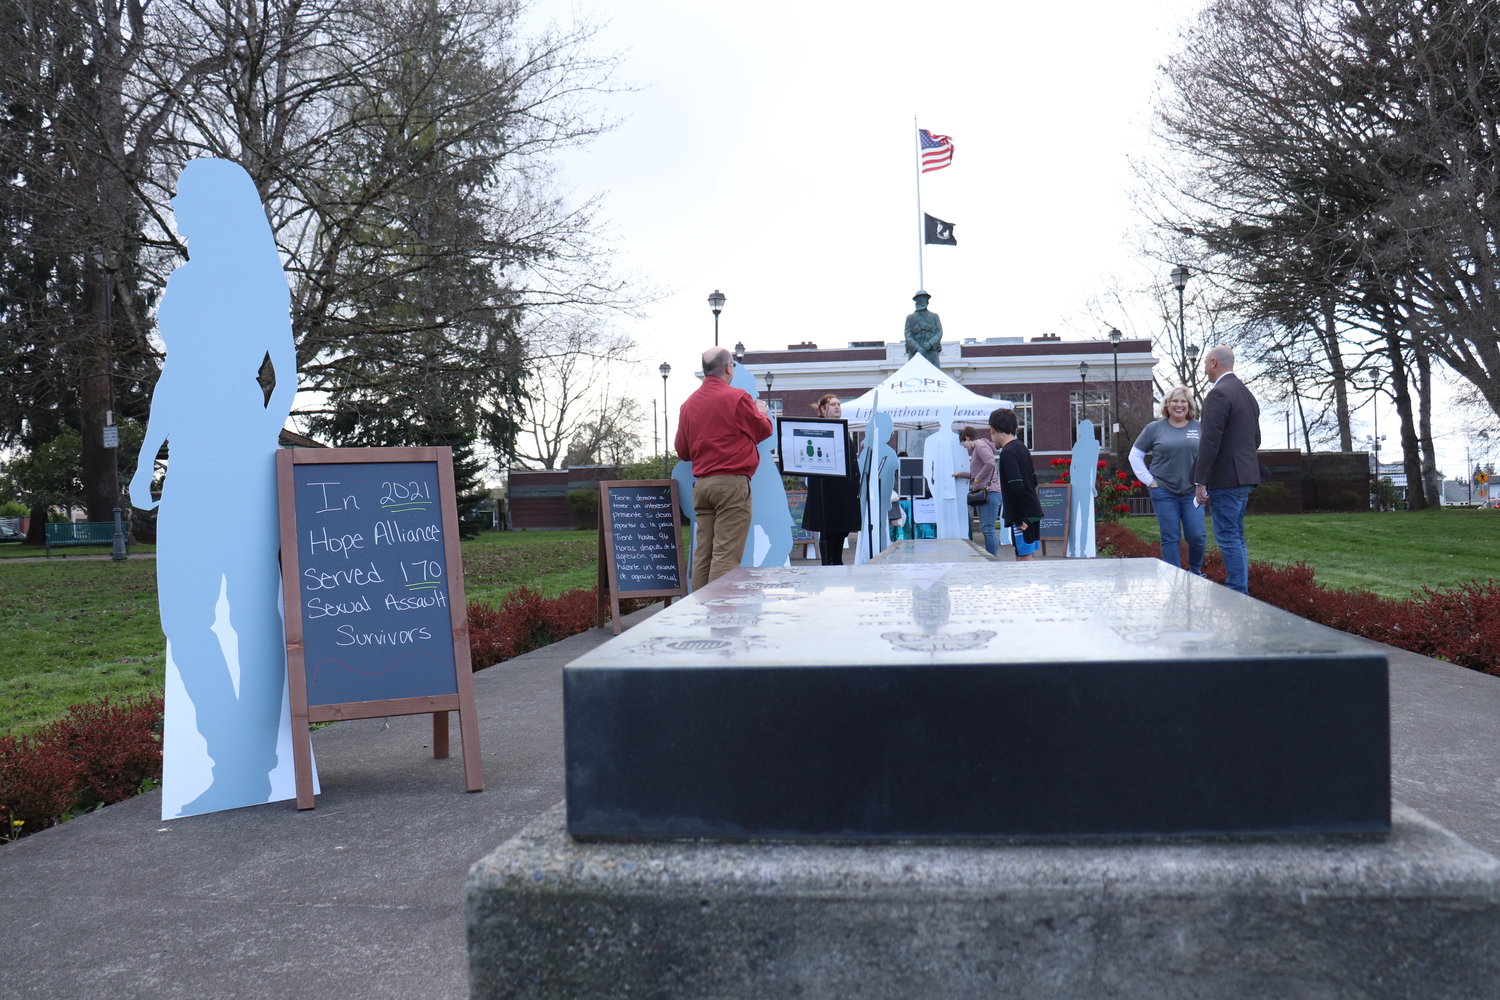 Hope Alliance kicked off Sexual Assault Awareness Month on Thursday with a self-guided walk at George Washington Park, where displays shared facts on sexual assault and created a space to remember sexual assault survivors.